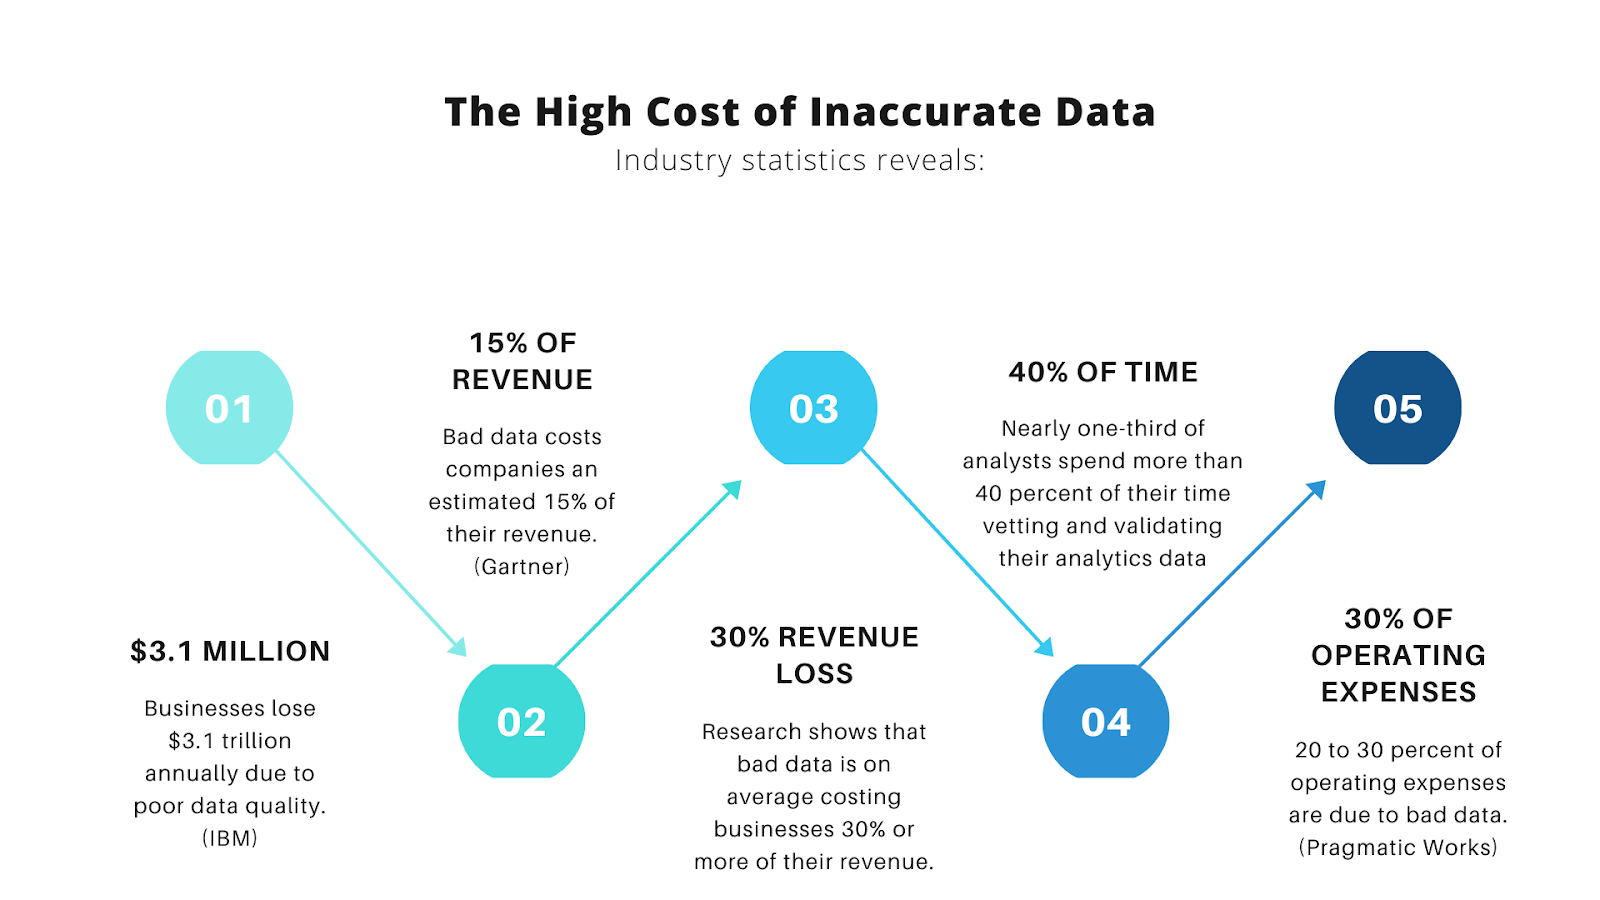 Data inaccuracy can cost you 